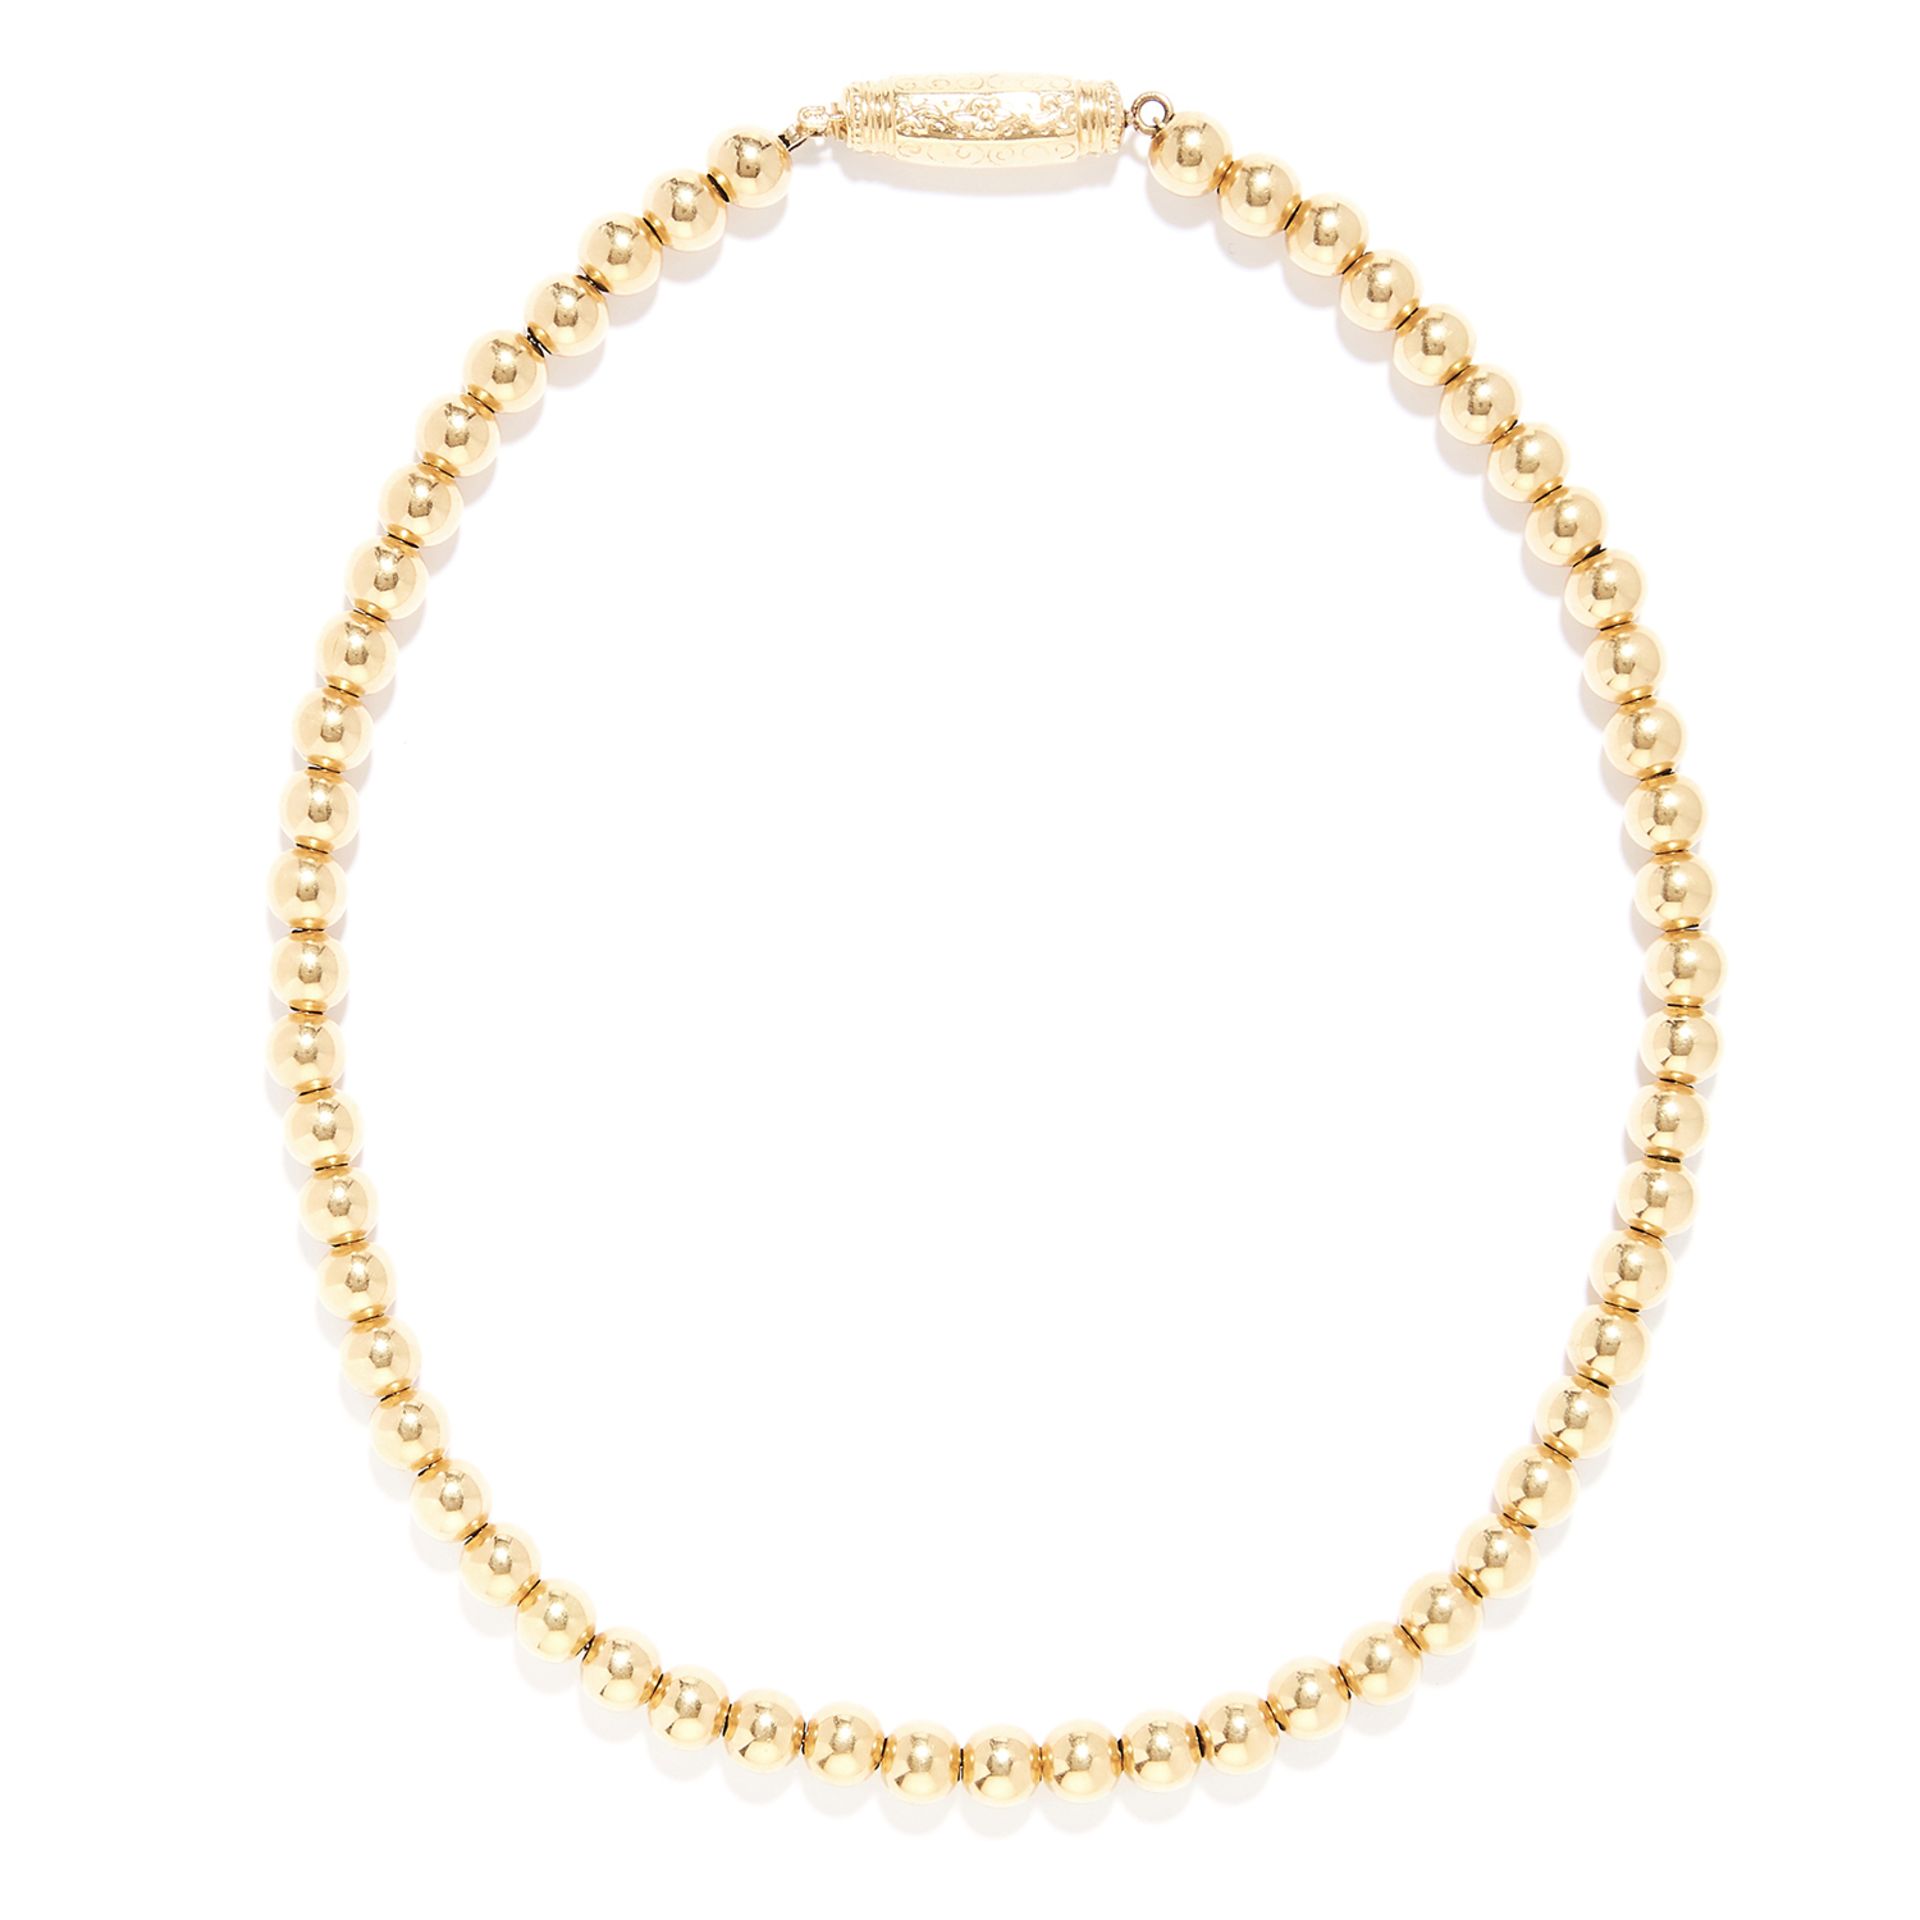 VINTAGE FANCY LINK BALL CHAIN NECKLACE in 18ct yellow gold, comprising a single row of gold beads,